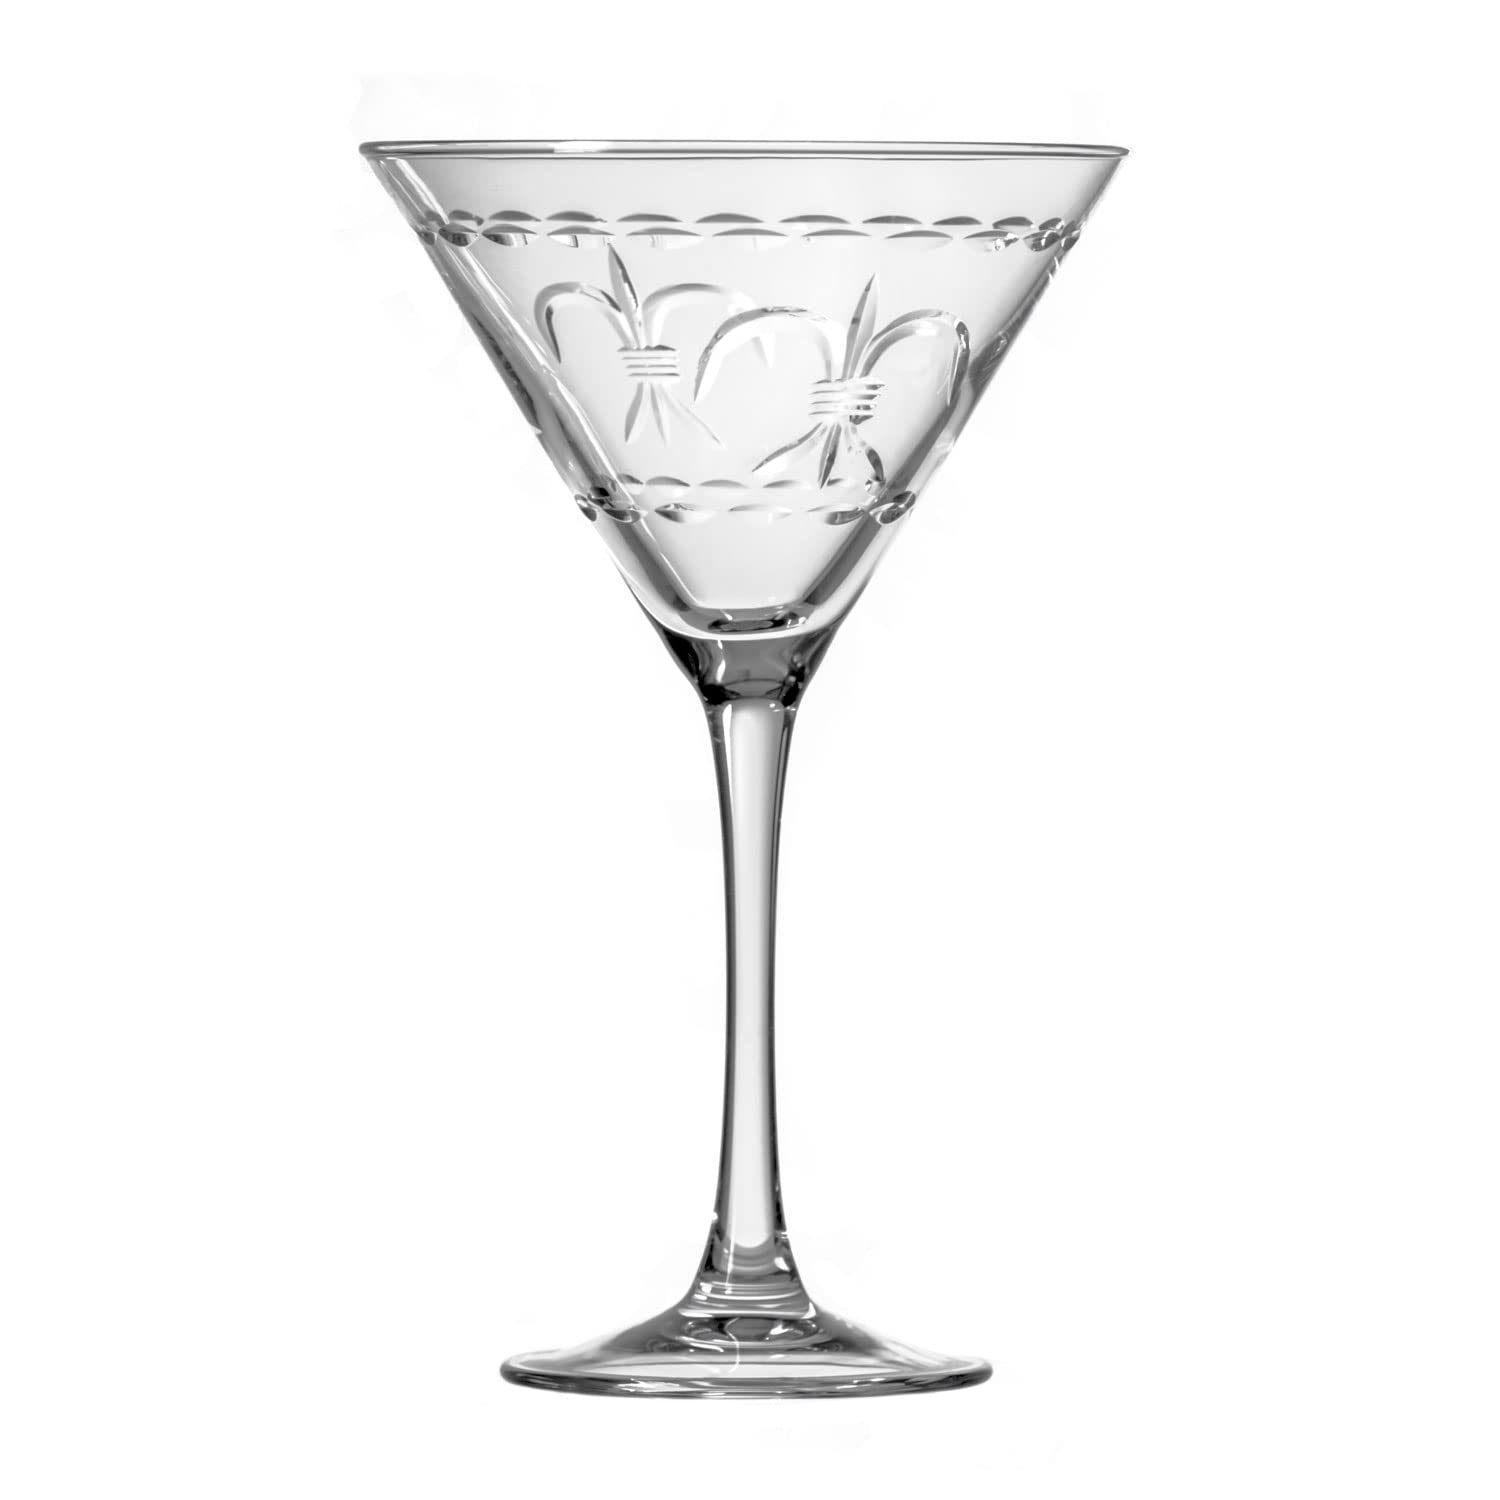 Rolf Glass Fleur De Lis Martini Glass 10 Ounce - Set of 4 Stemmed Martini Glasses - Lead-Free Glass - Diamond Wheel Engraved Cocktail Glasses - Made in the USA